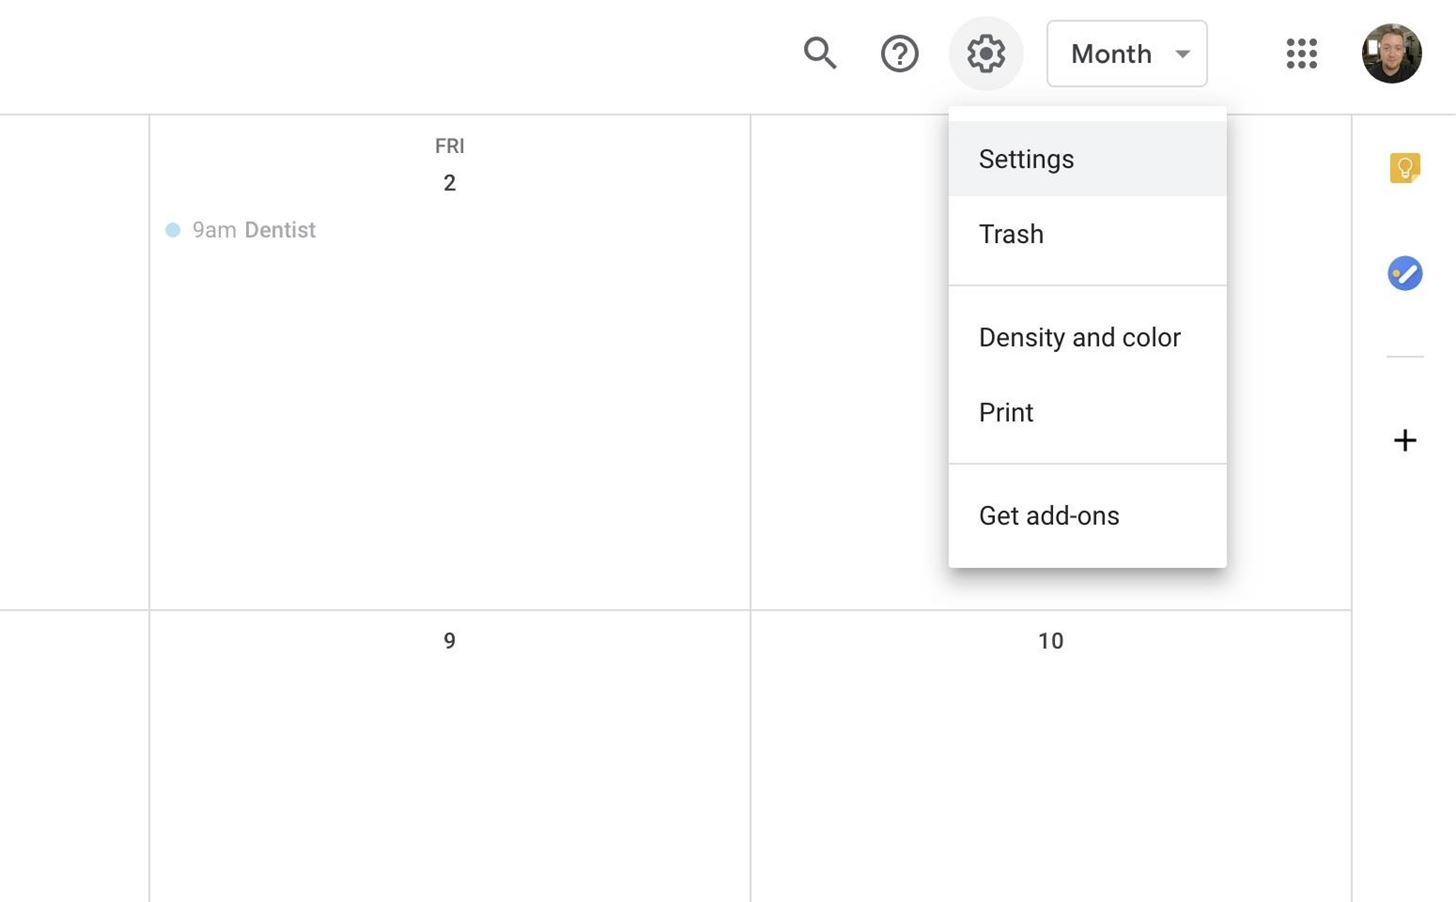 Spam Events Showing Up in Google Calendar? Here's the Fix